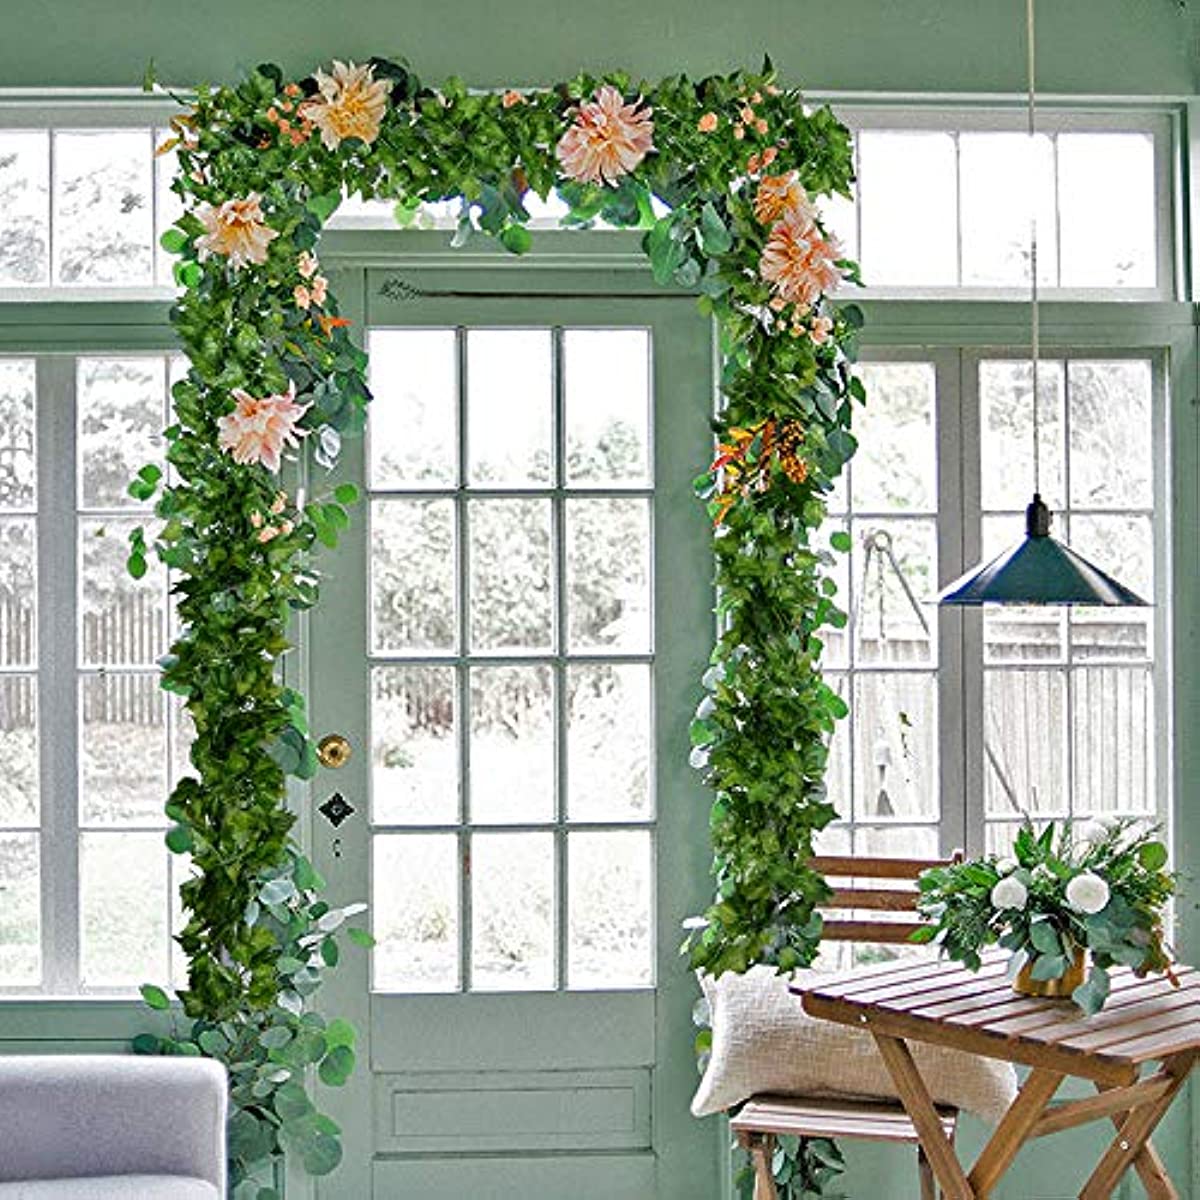 12pcs Artificial Ivy Garland Fake Vine Hanging Plants For Home Bedroom  Wedding Birthday Party Valentine's Day Decoration, Green Faux Leaves